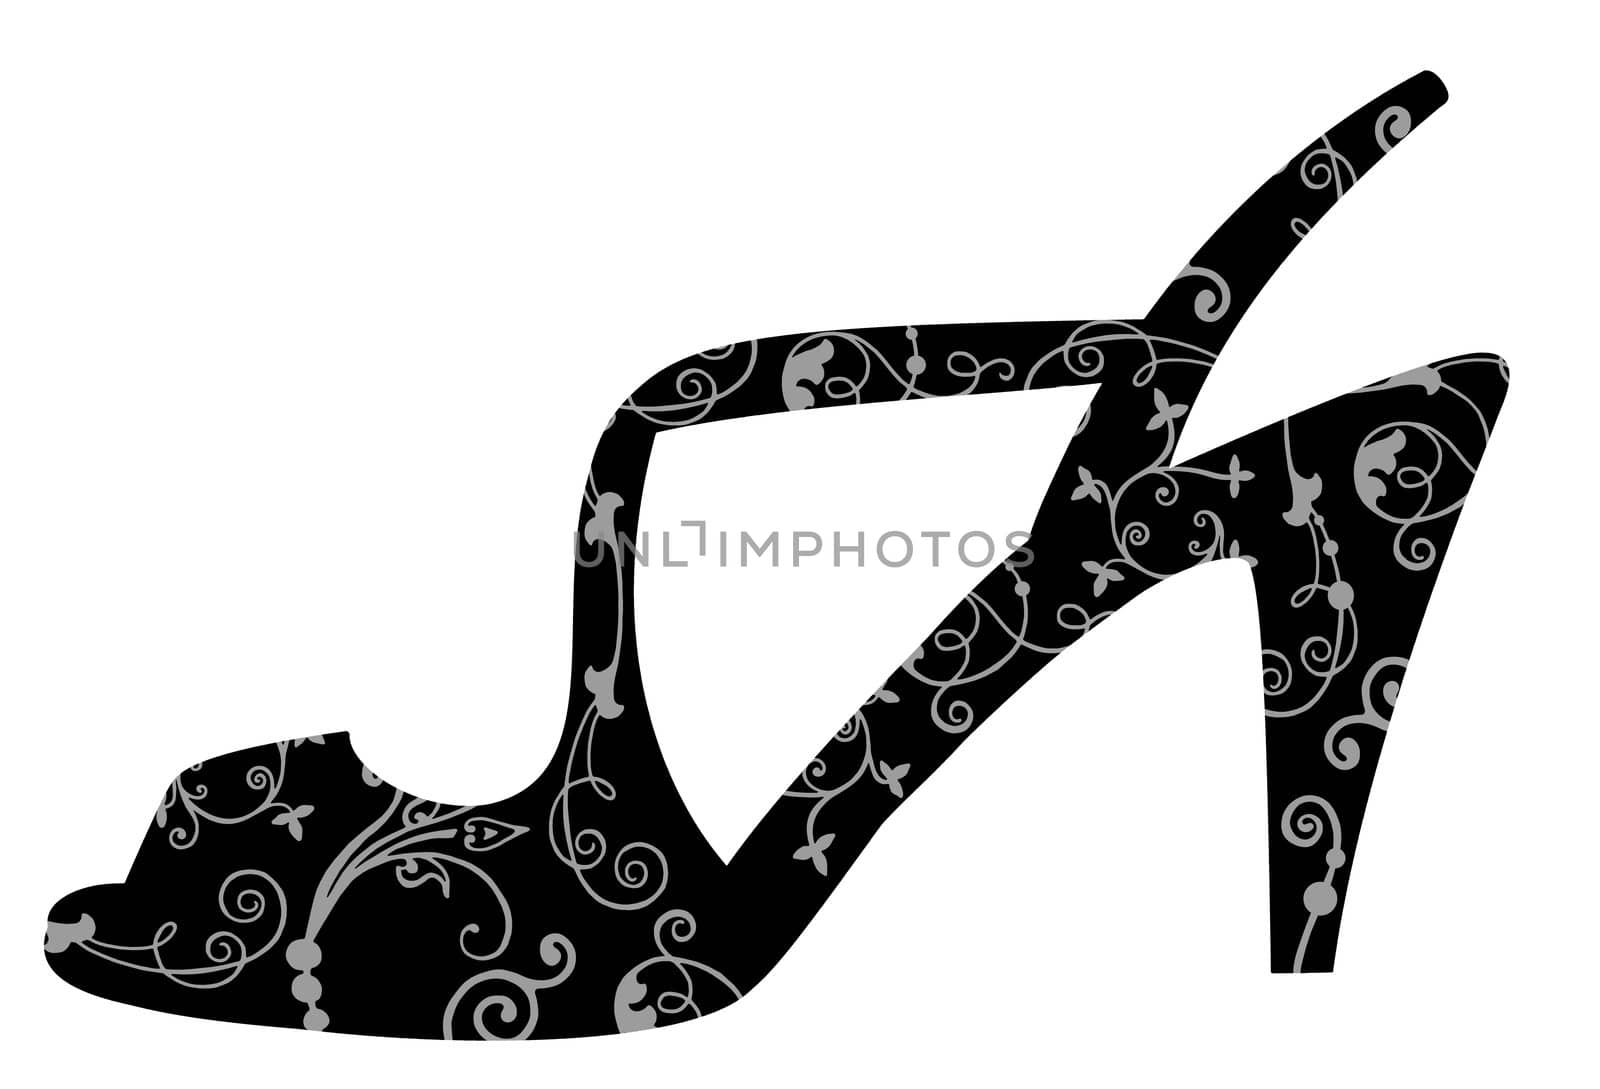 Illustration of an ornate decorated shoe